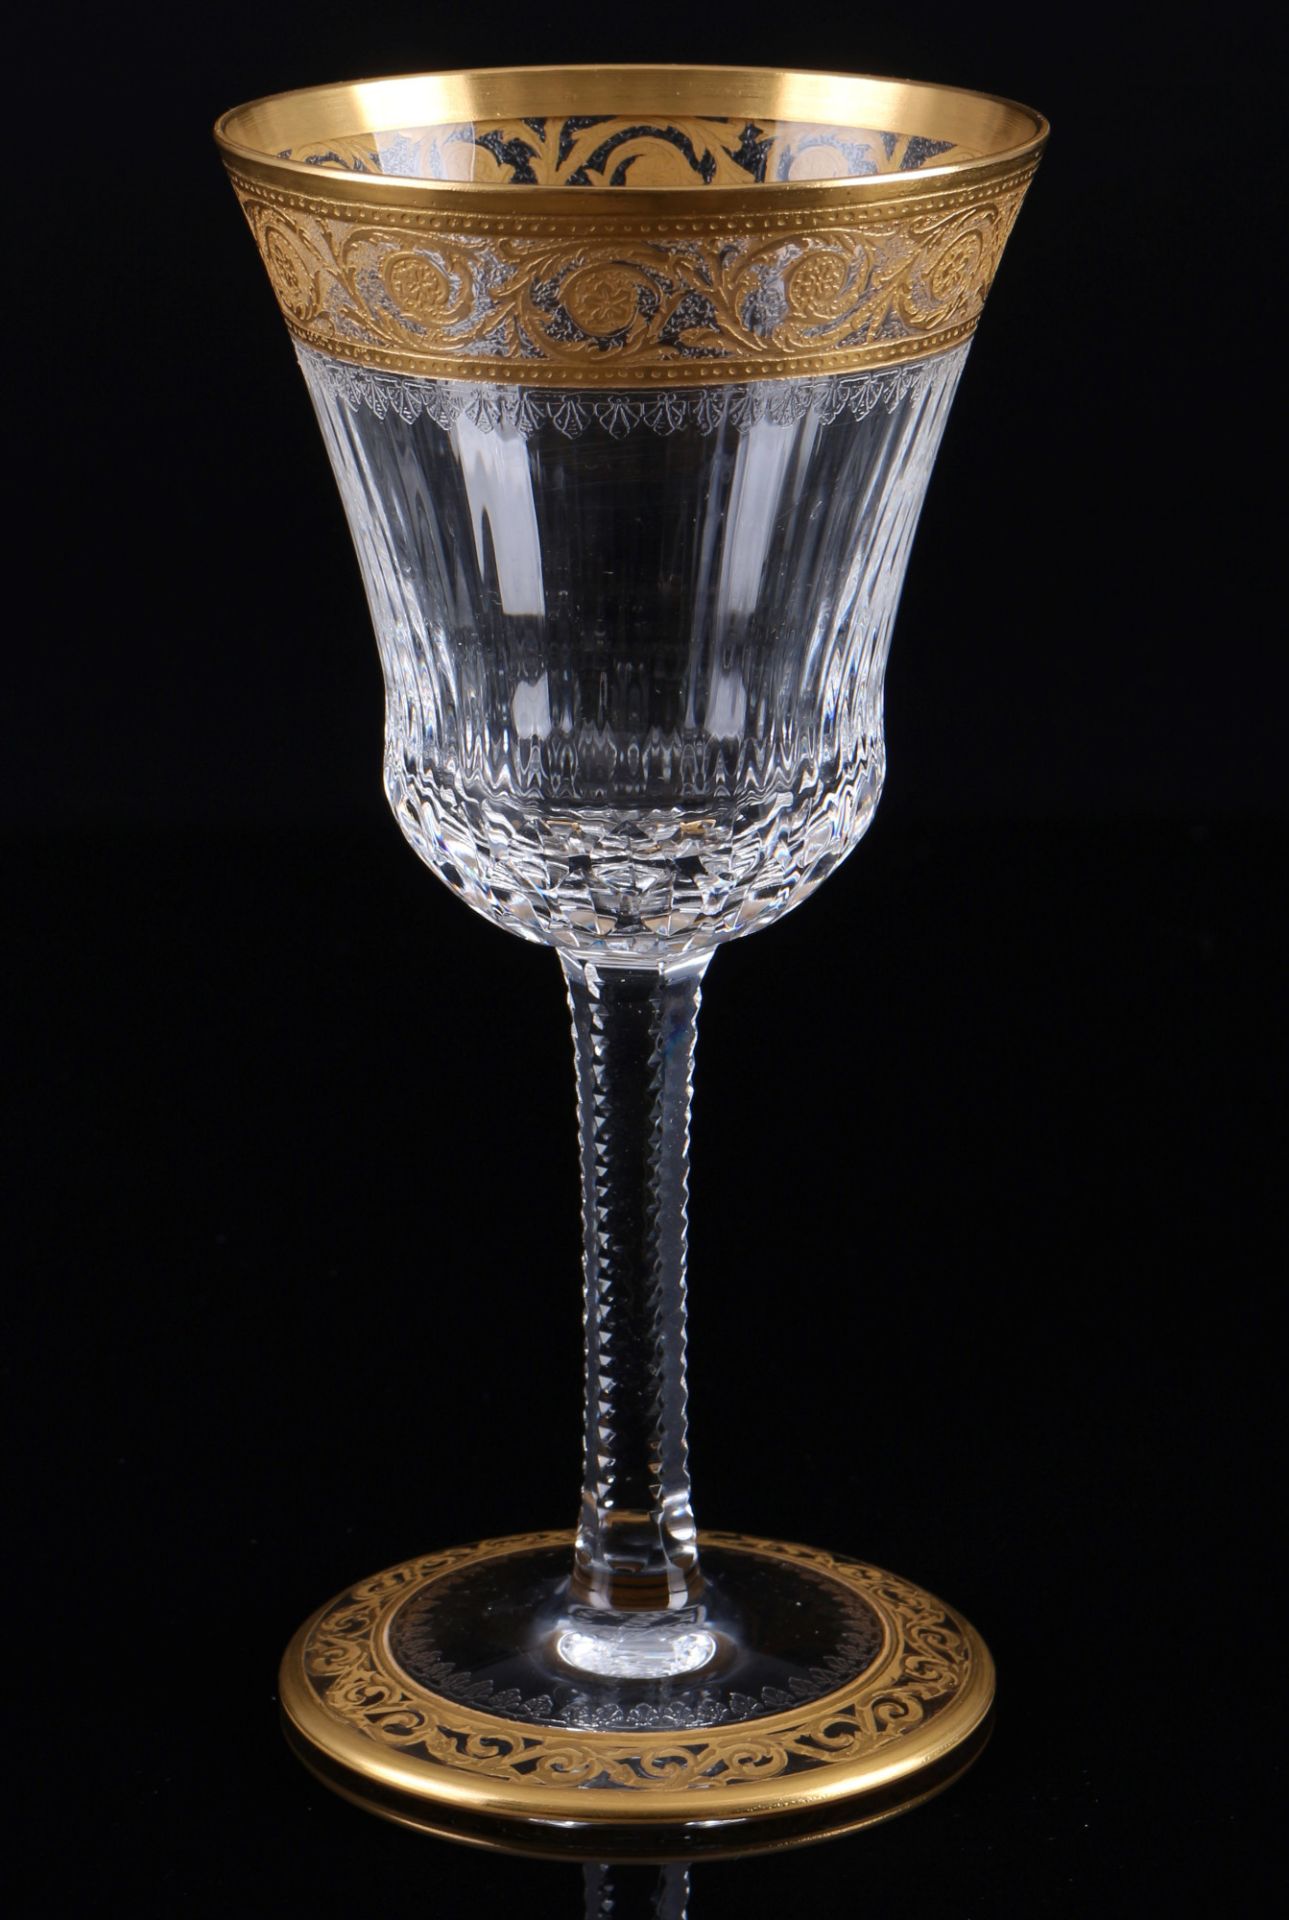 St. Louis Thistle Gold 6 wine glasses No.4, Weingläser, - Image 2 of 4